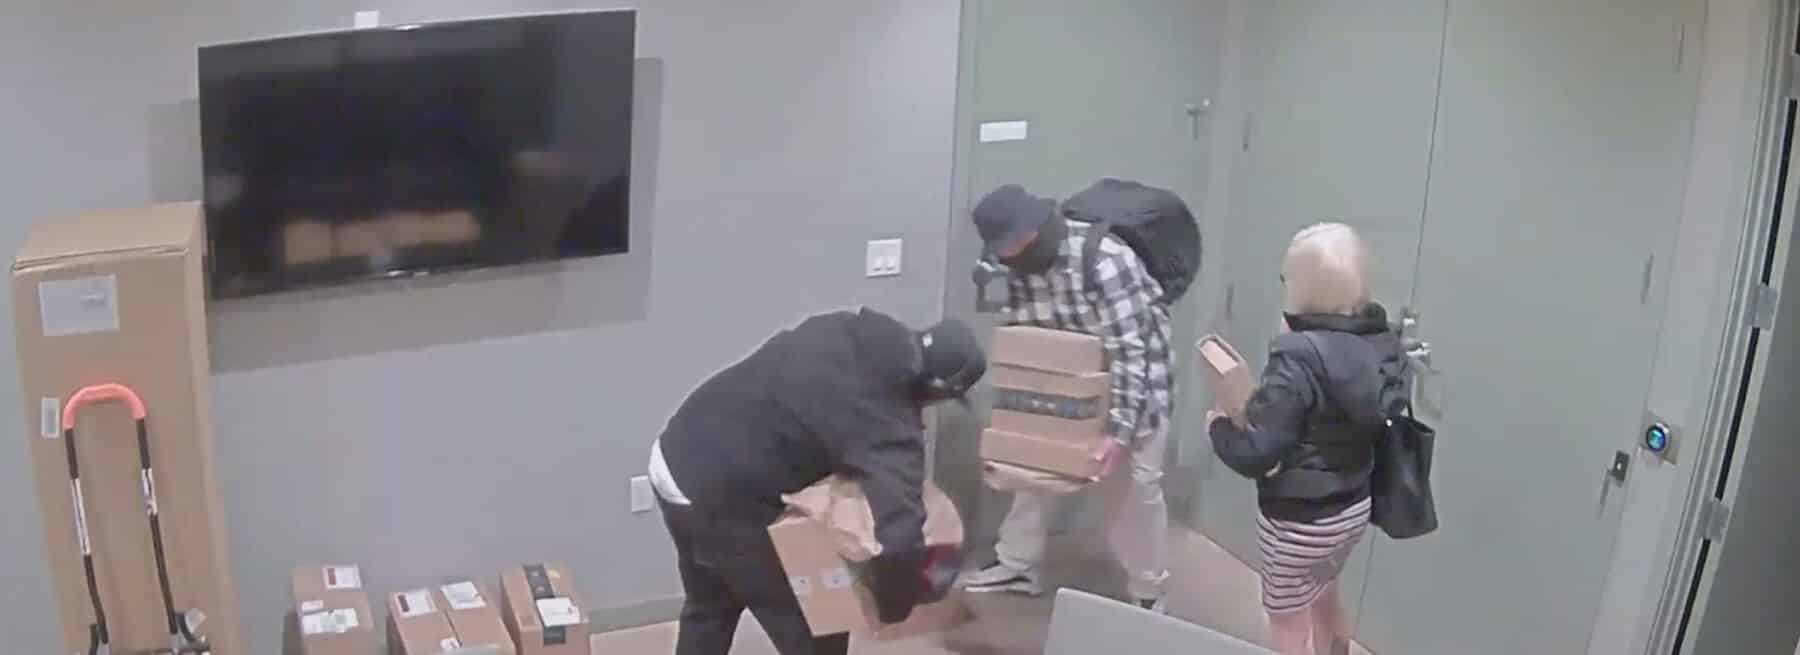 Group stealing packages from apartment lobby